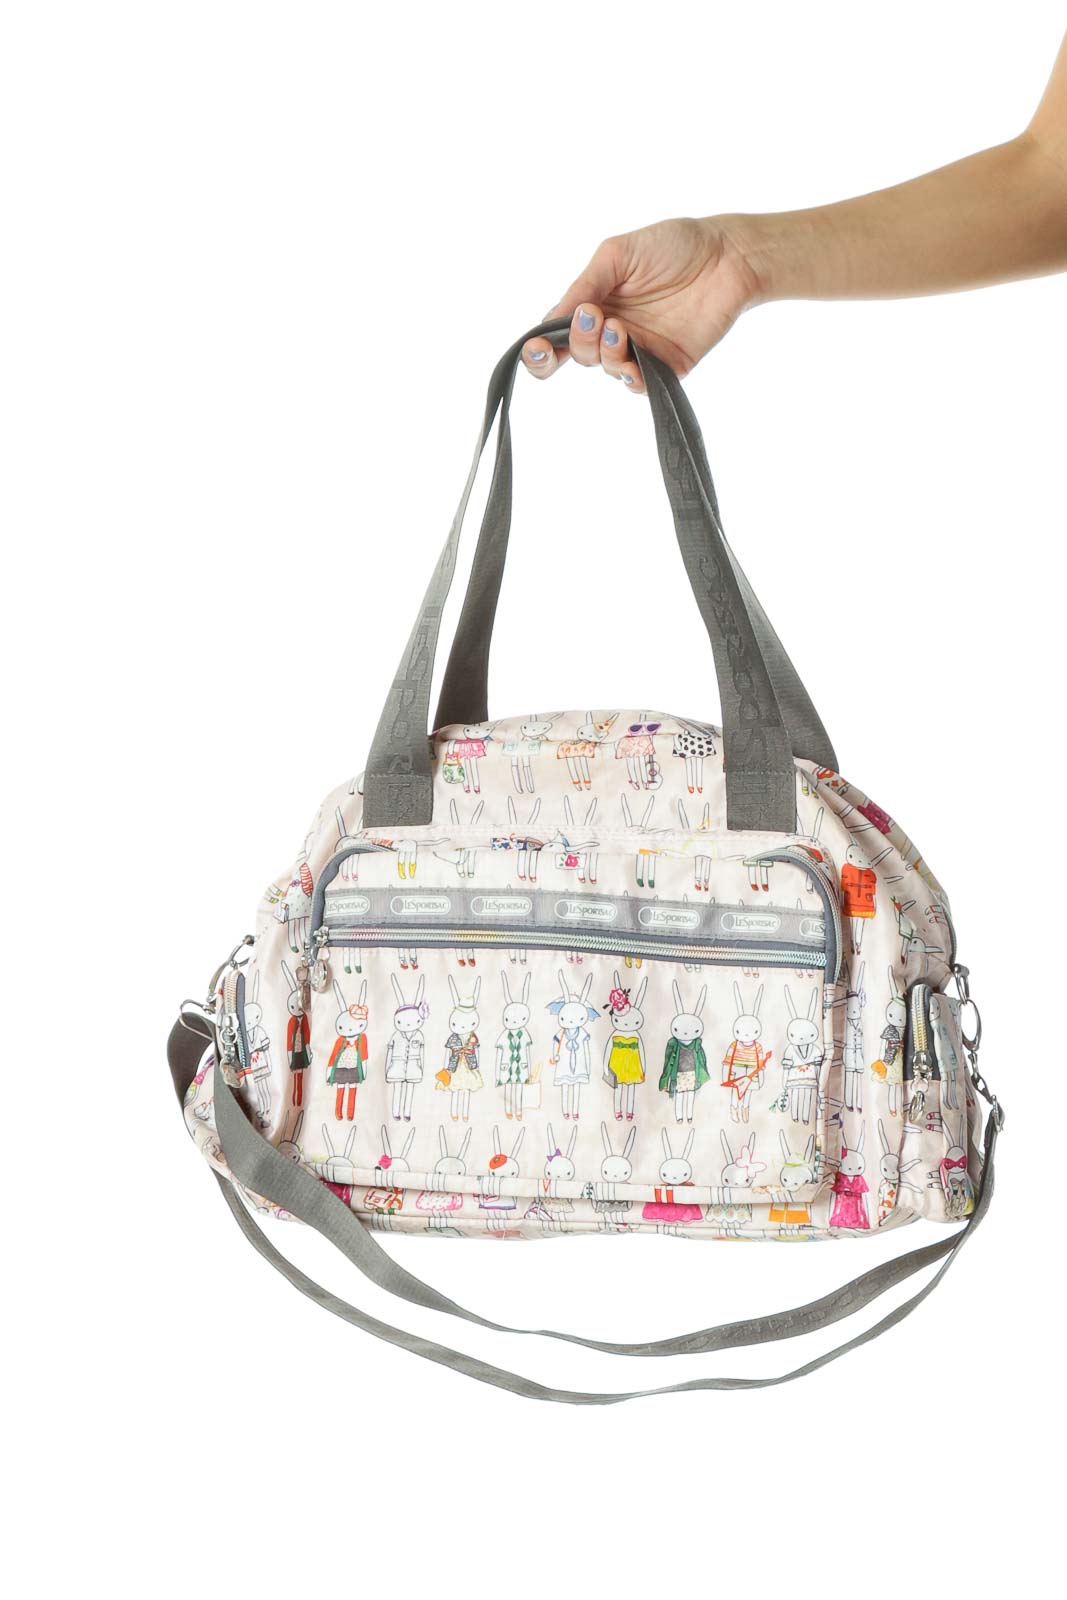 Multicolored Bunny Prints Zippered Pocketed Messenger Bag Front